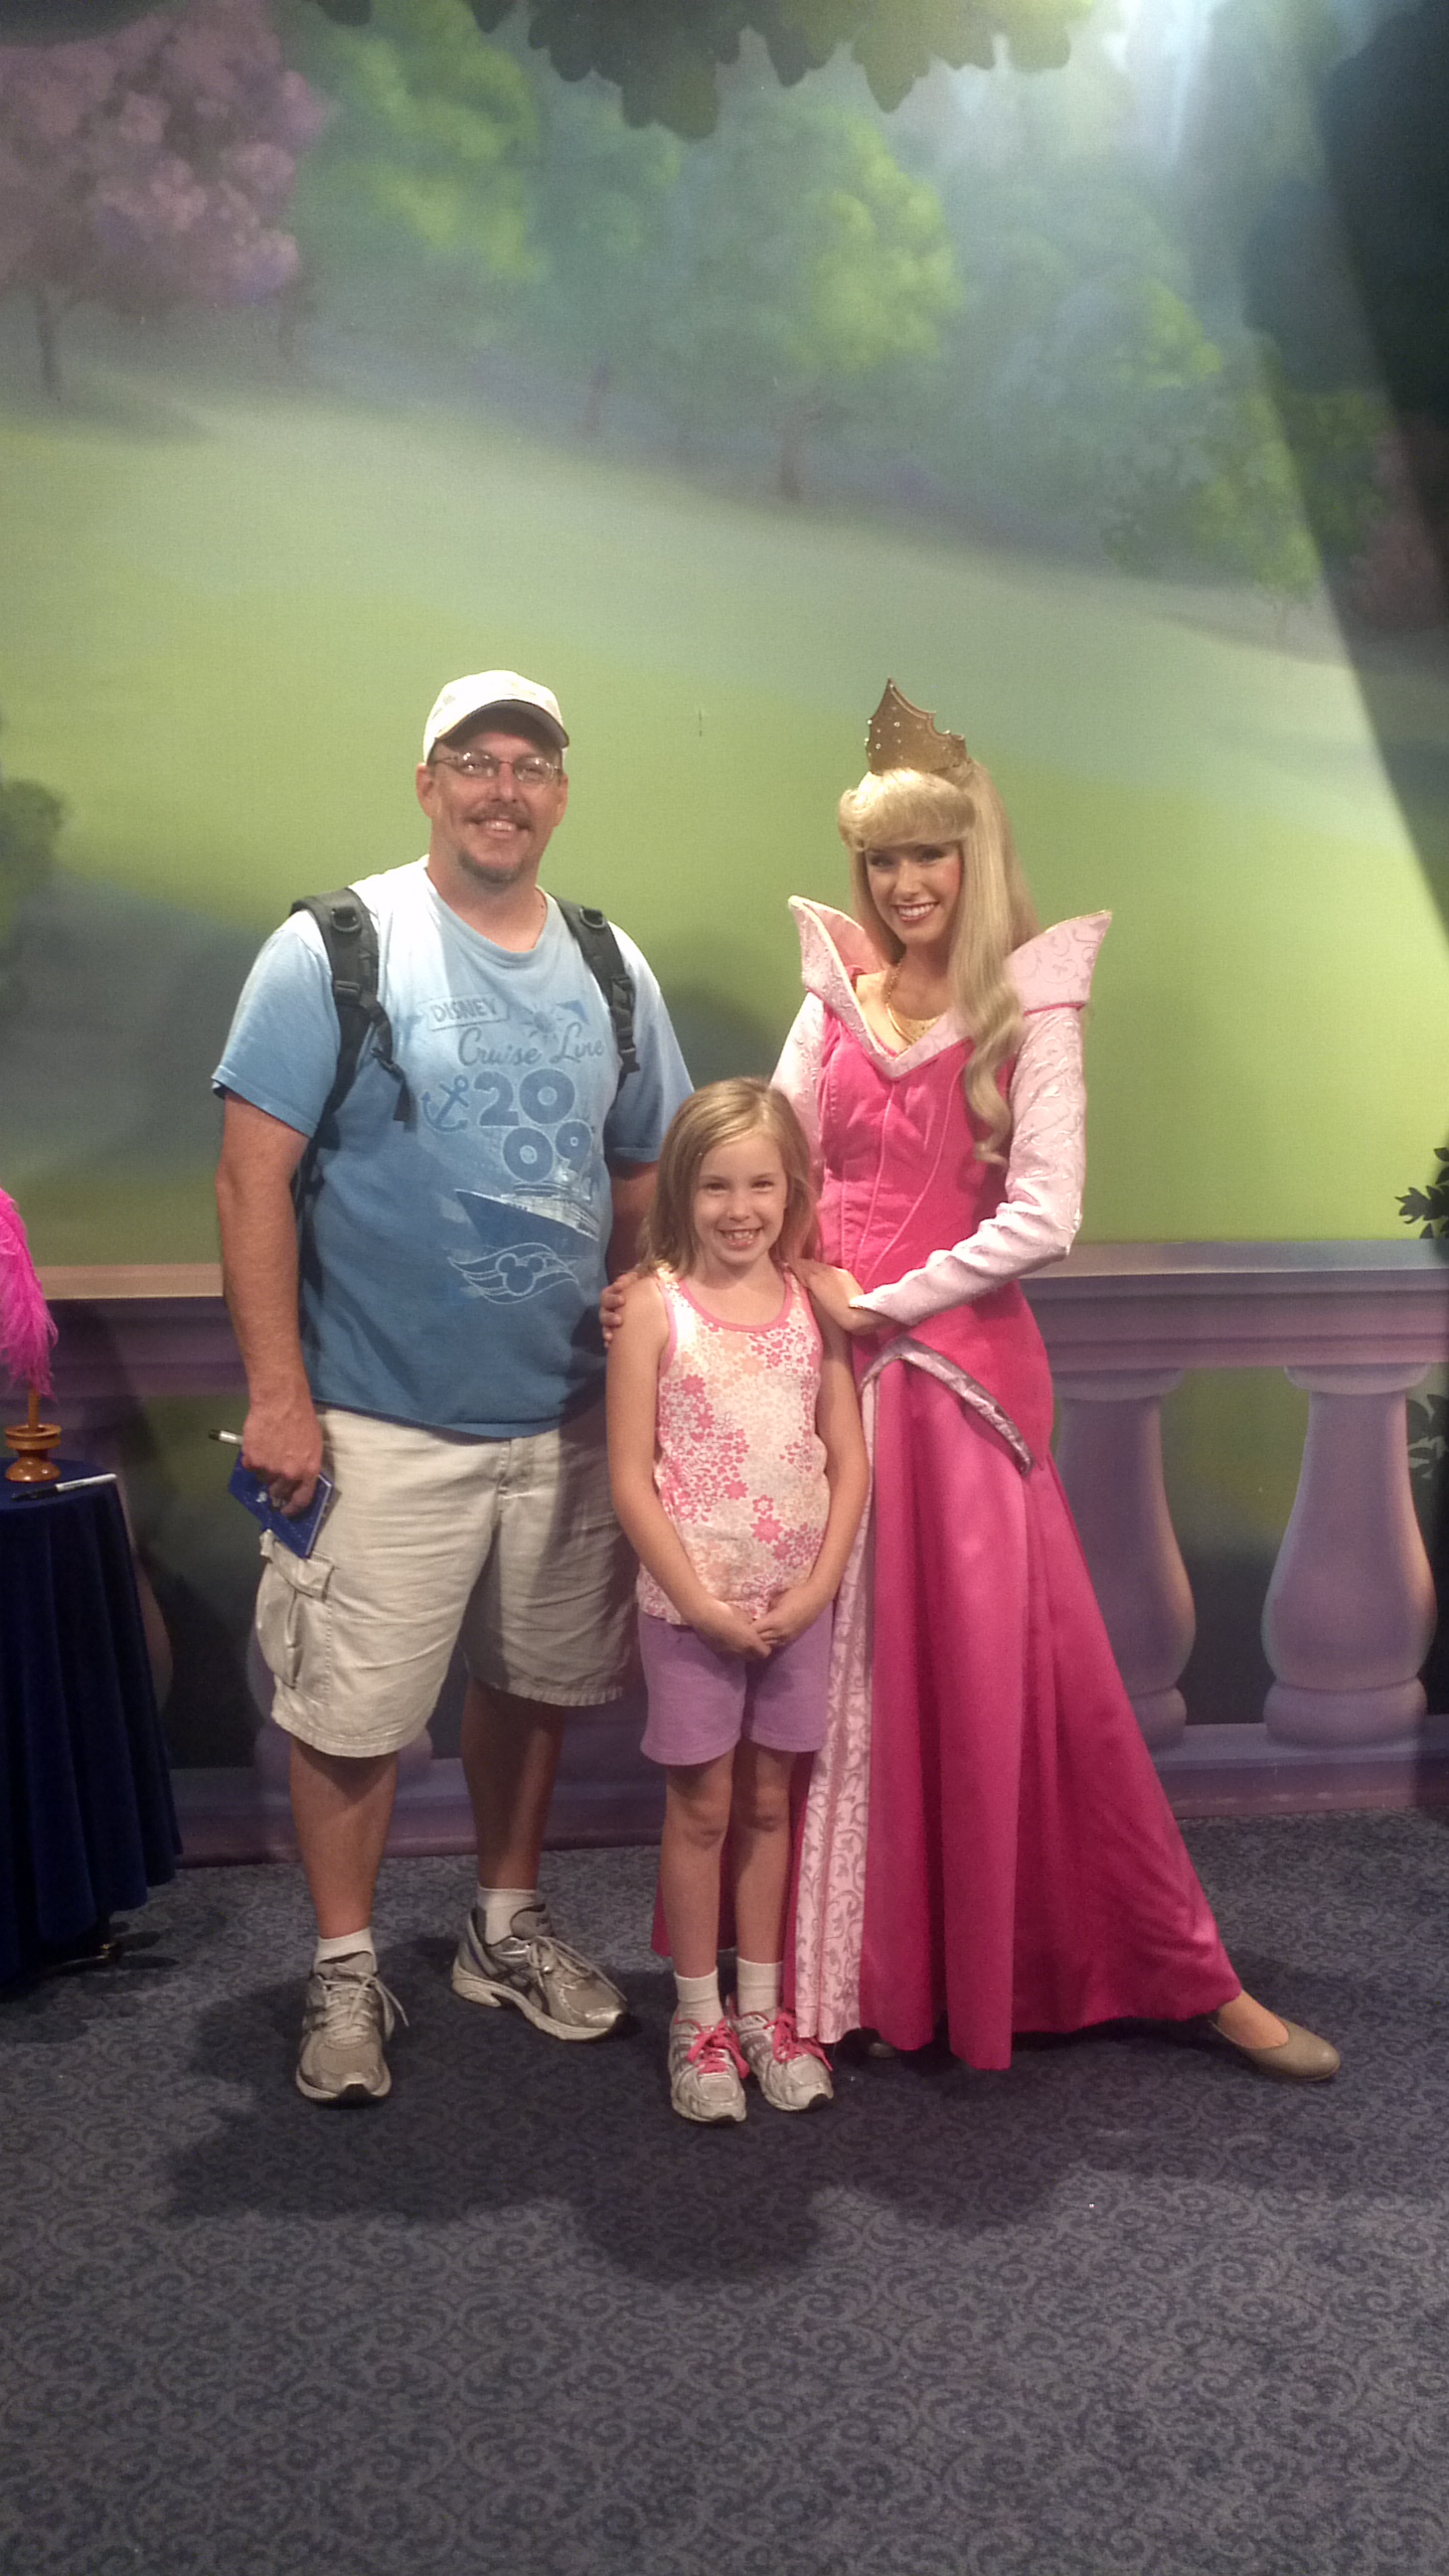 Aurora (Sleeping Beauty)  at Town Square Theater in Magic Kingdom 2012